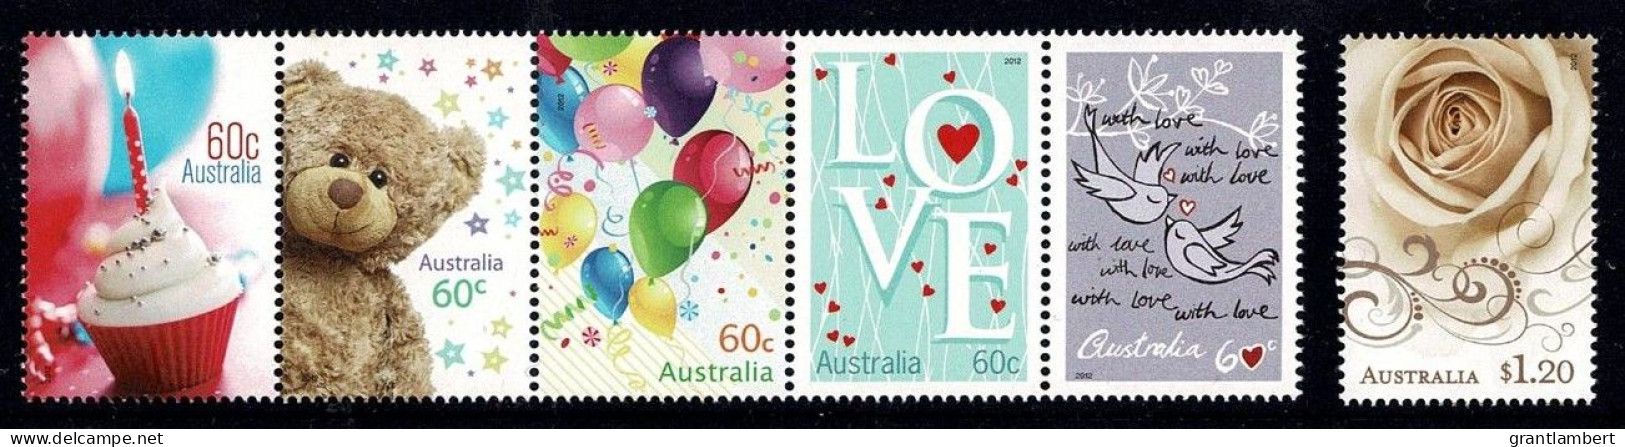 Australia 2012 Greetings - Precious Moments  Set Of 6 MNH - Mint Stamps